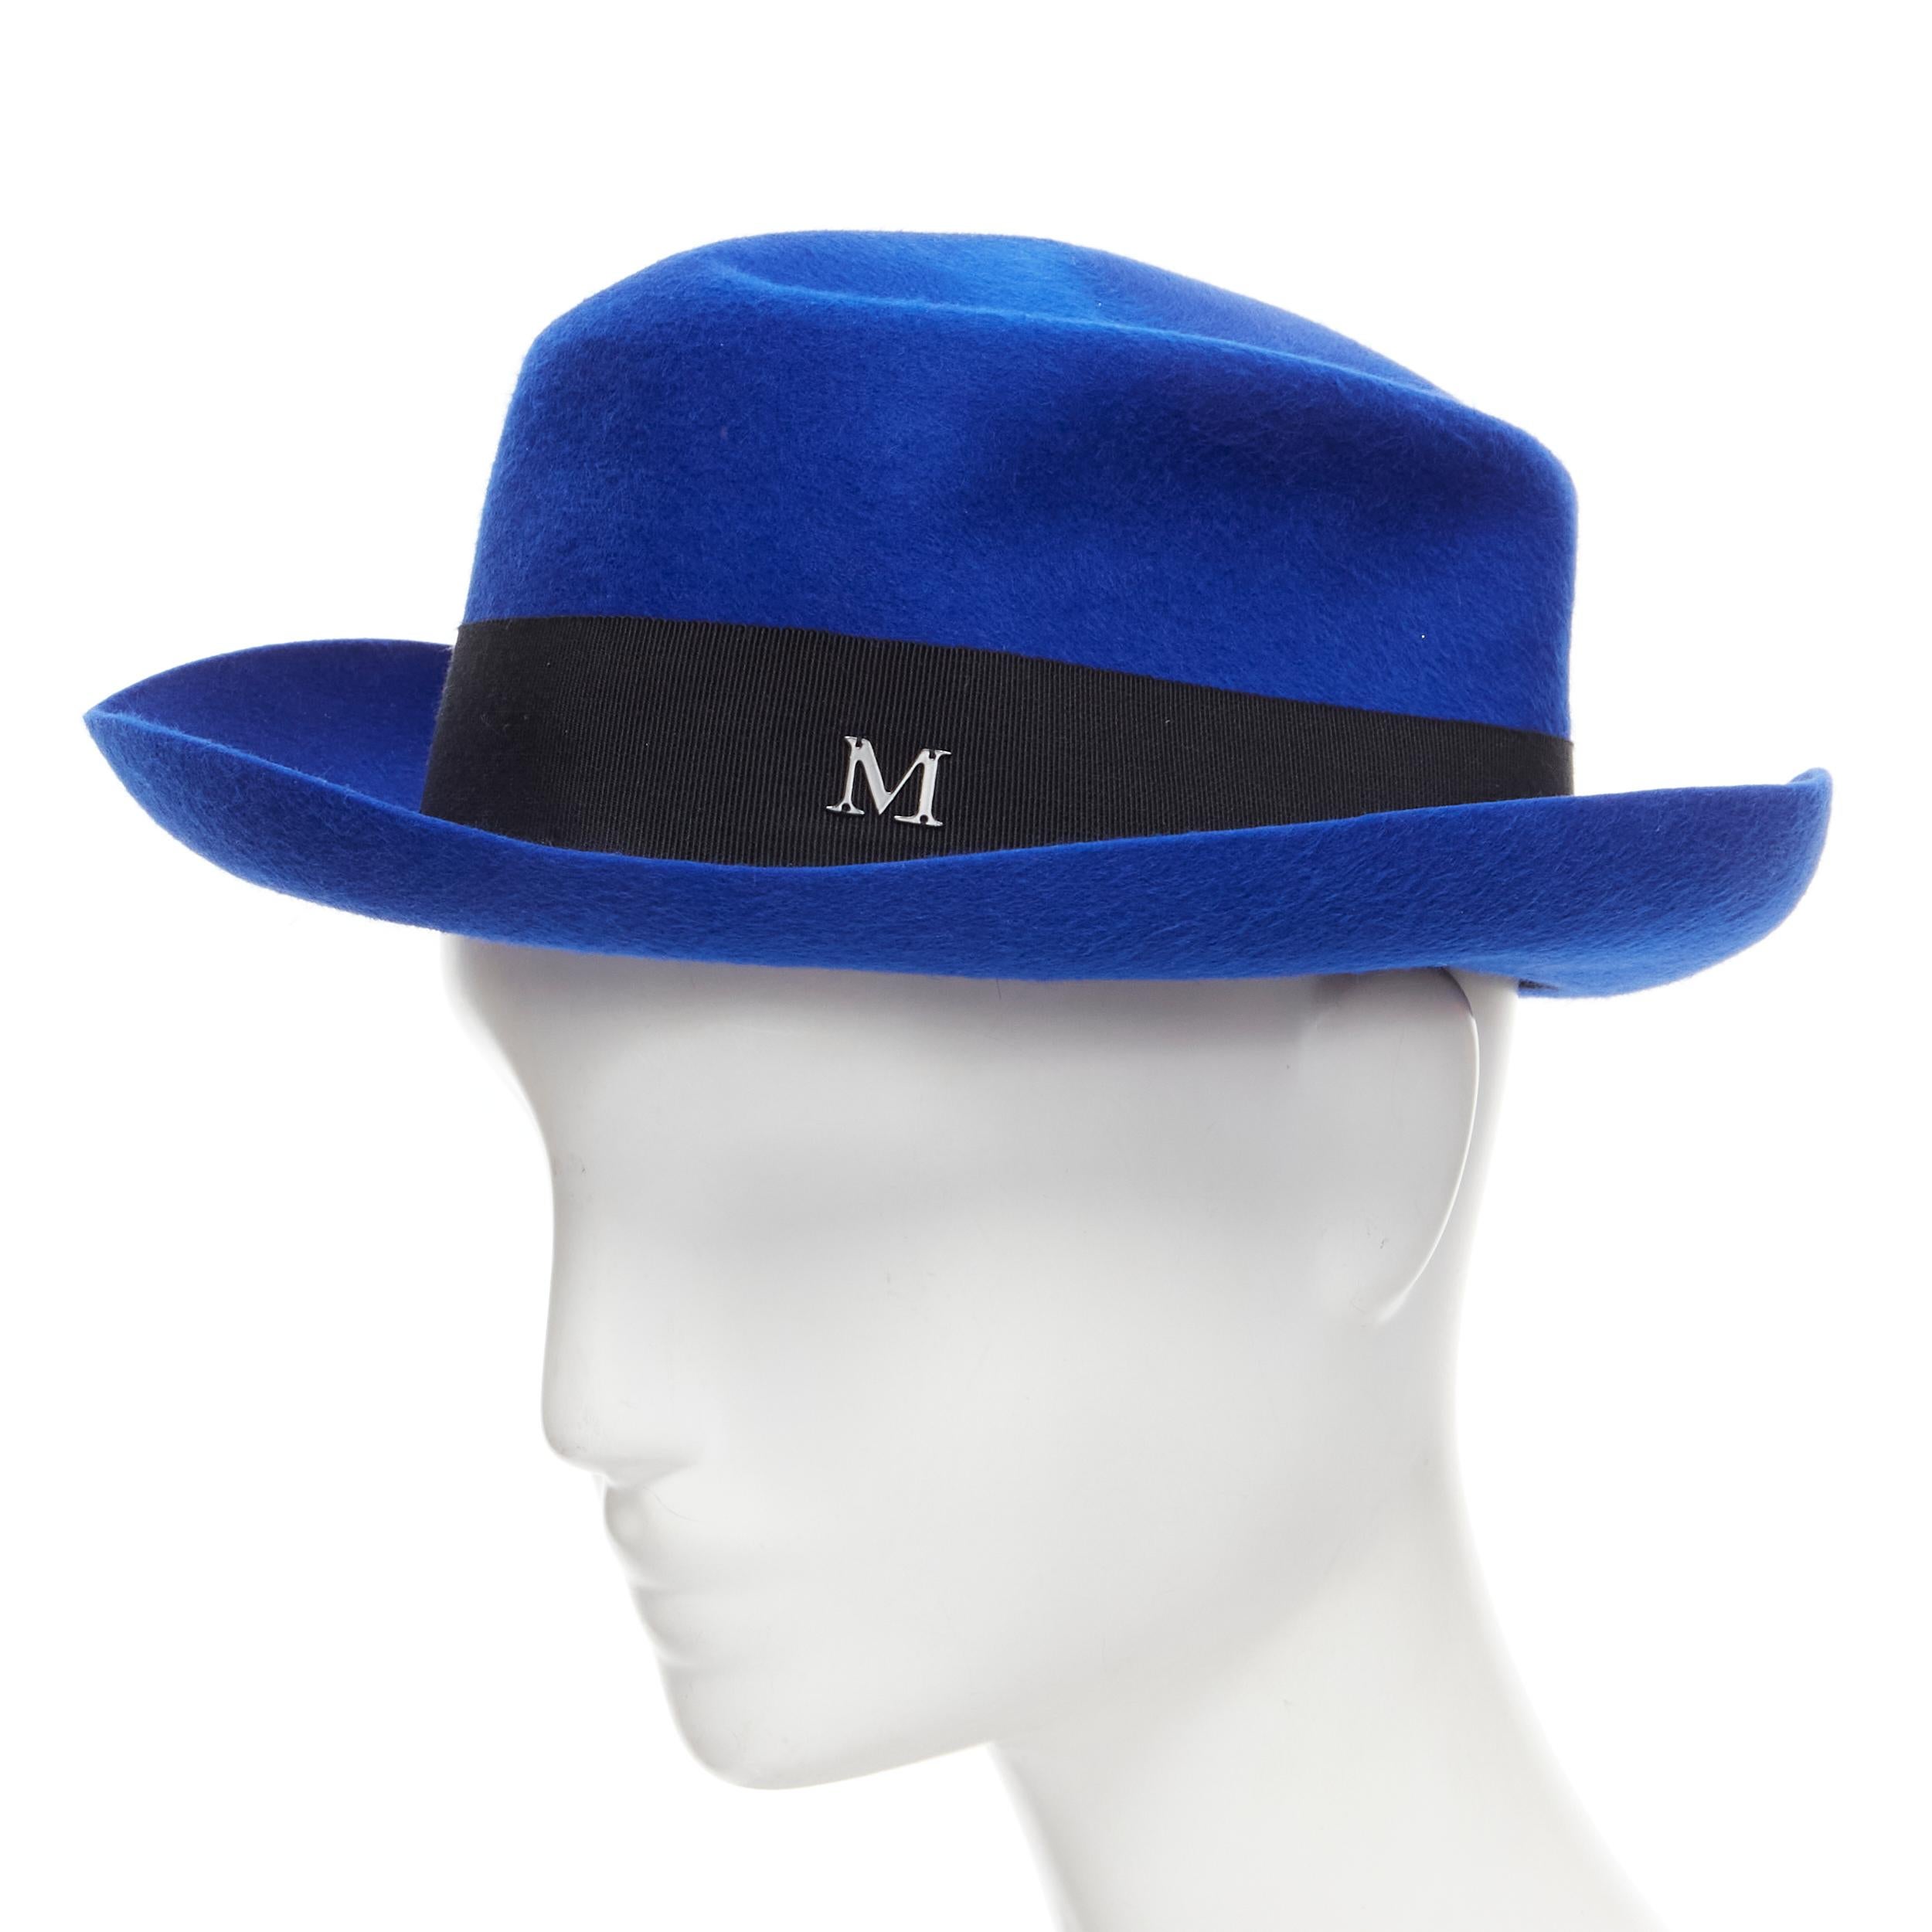 new MAISON MICHEL Tiger cobalt blue wool felt black grosgrain metal logo fedora hat 57cm 
Reference: MELK/A00154 
Brand: Maison Michel 
Material: Wool 
Color: Blue 
Pattern: Solid 

CONDITION: 
Condition: New with tags. 

SIZING: 
Designer Size: